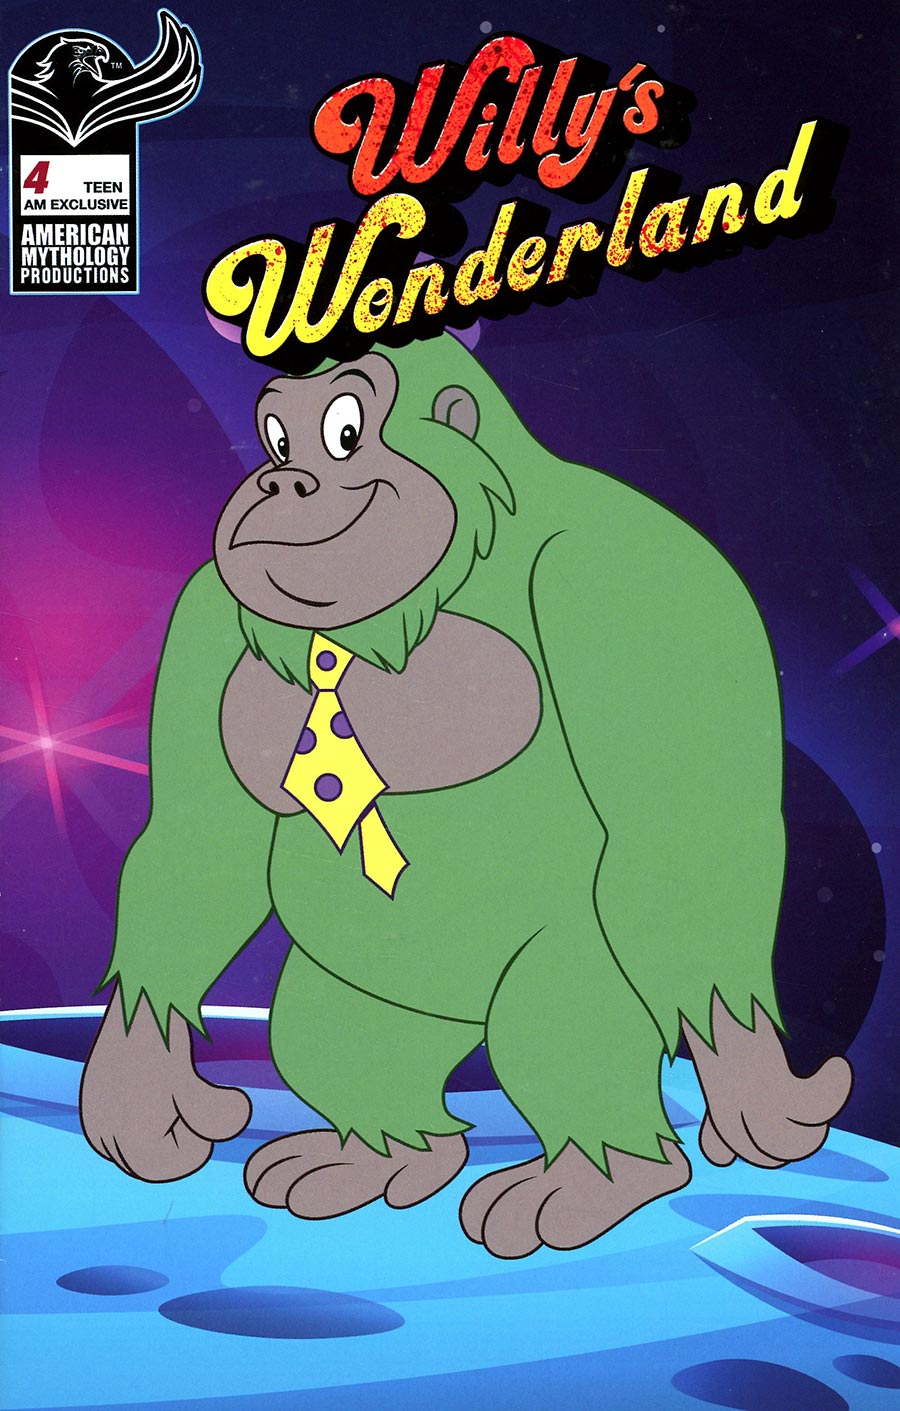 Willys Wonderland Prequel #4 Cover D Limited Edition Gus Gorilla Poster Variant Cover